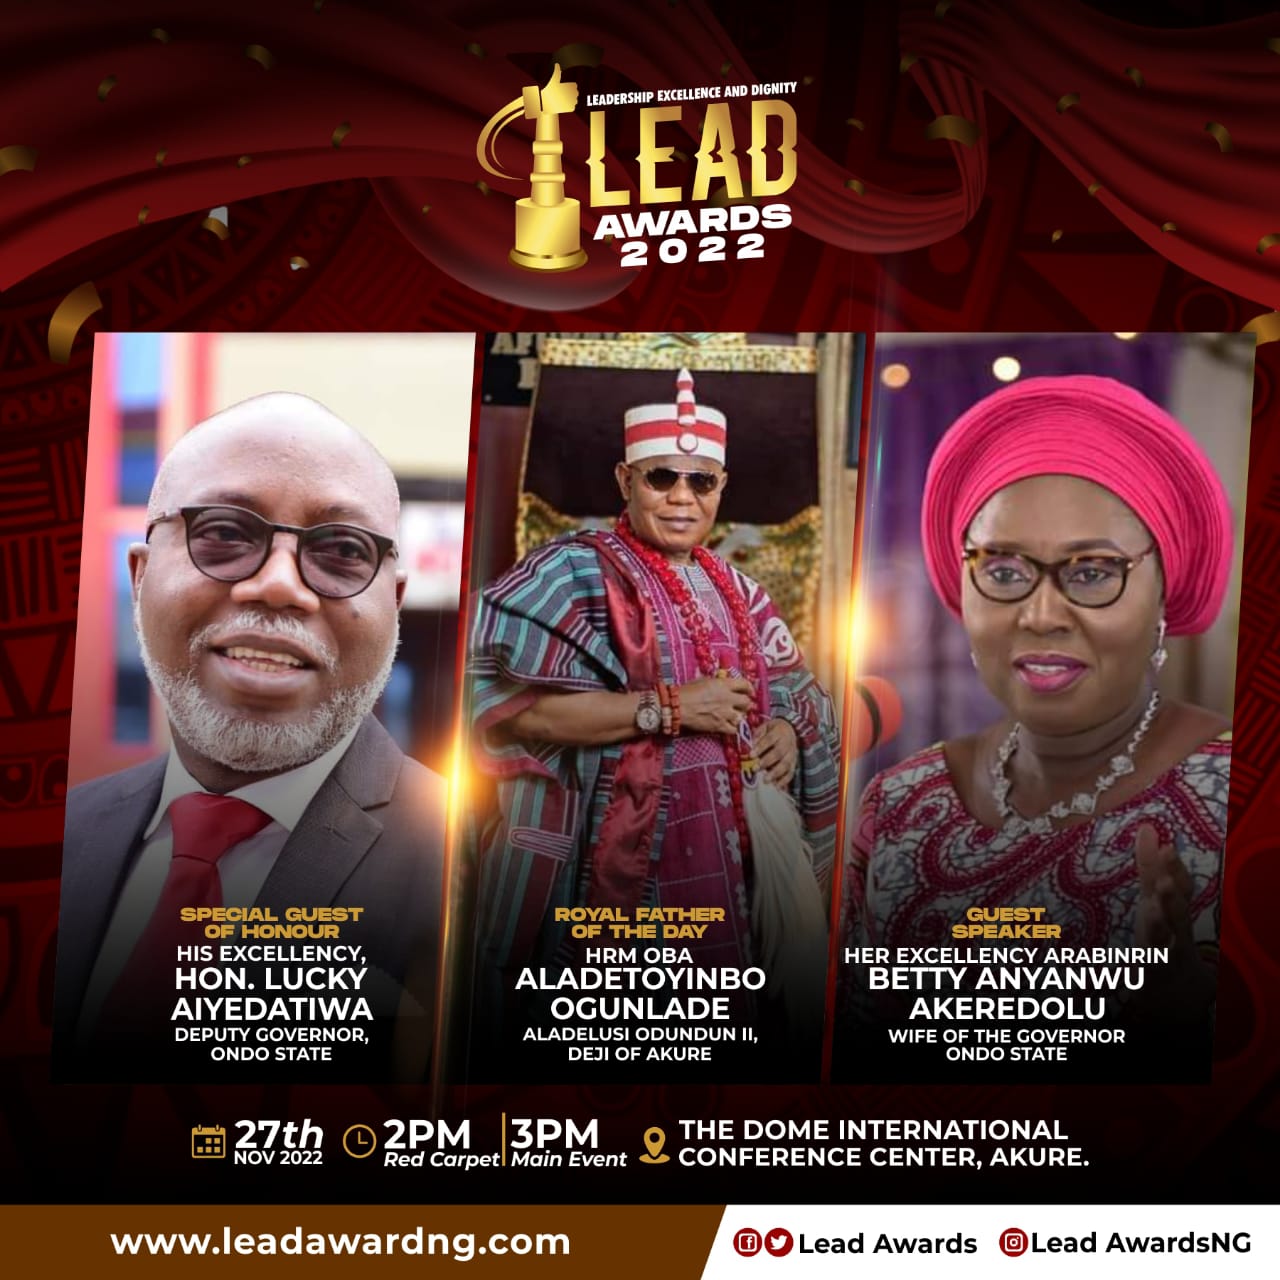 Ondo First Lady To Speak At 2022 Lead Awards; State Deputy Governor, Deji of Akure, Other Dignatories Set To Attend 